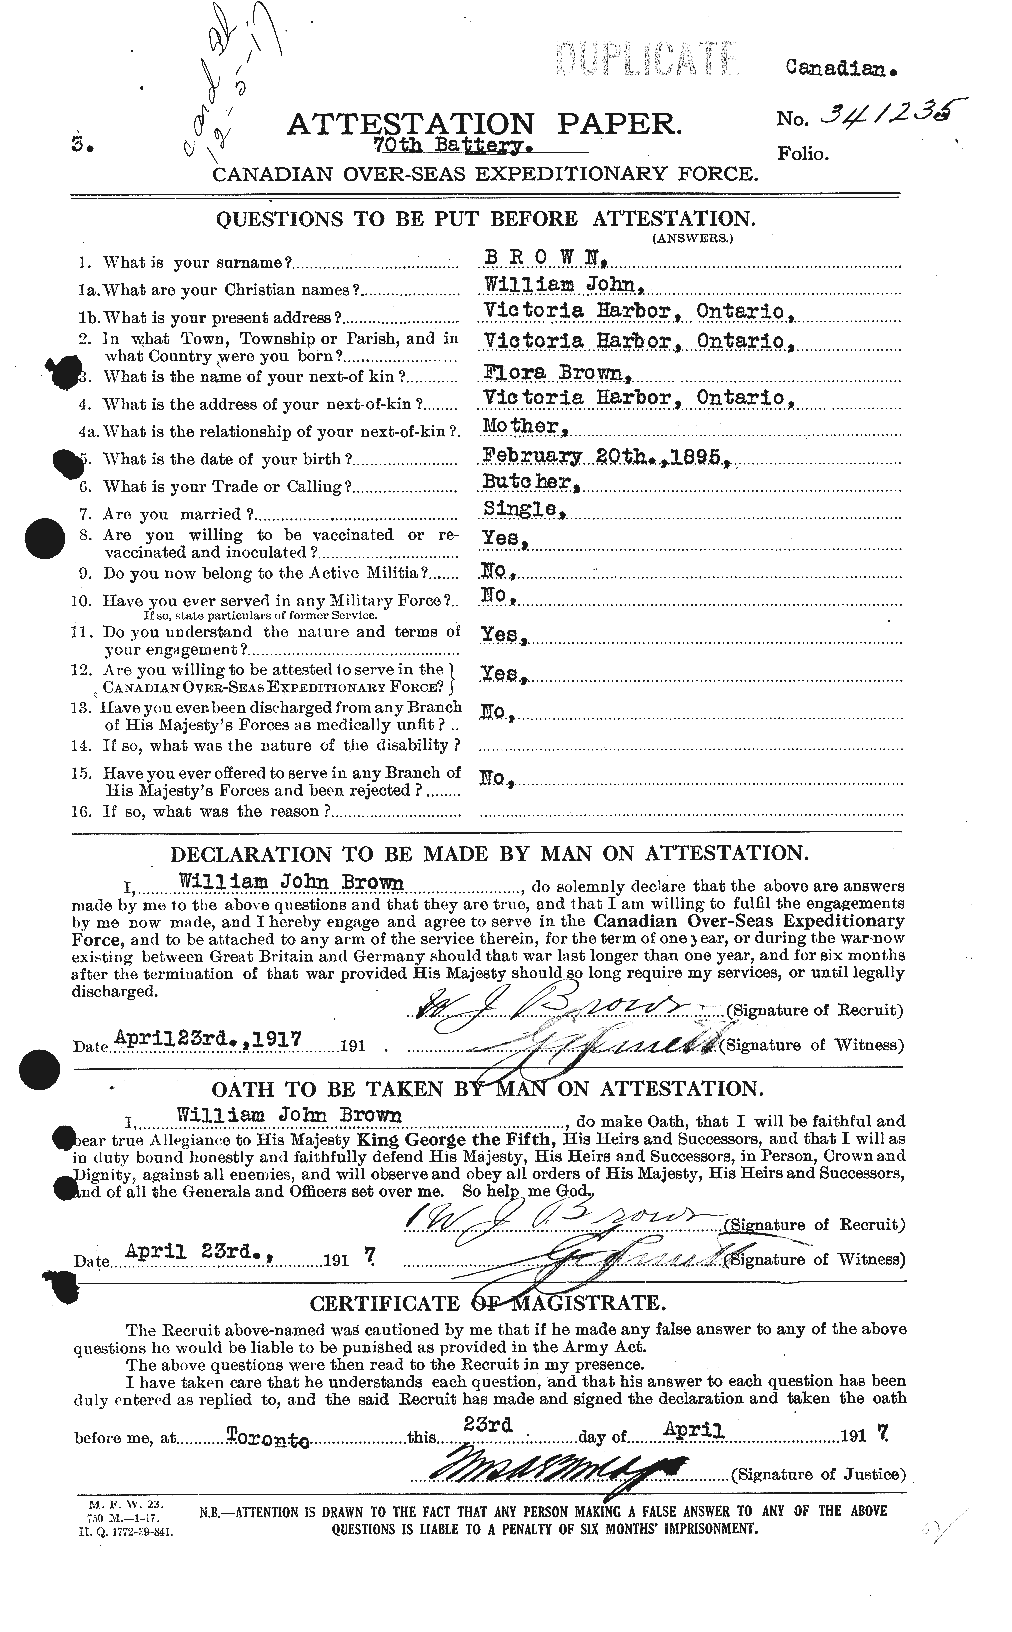 Personnel Records of the First World War - CEF 270253a